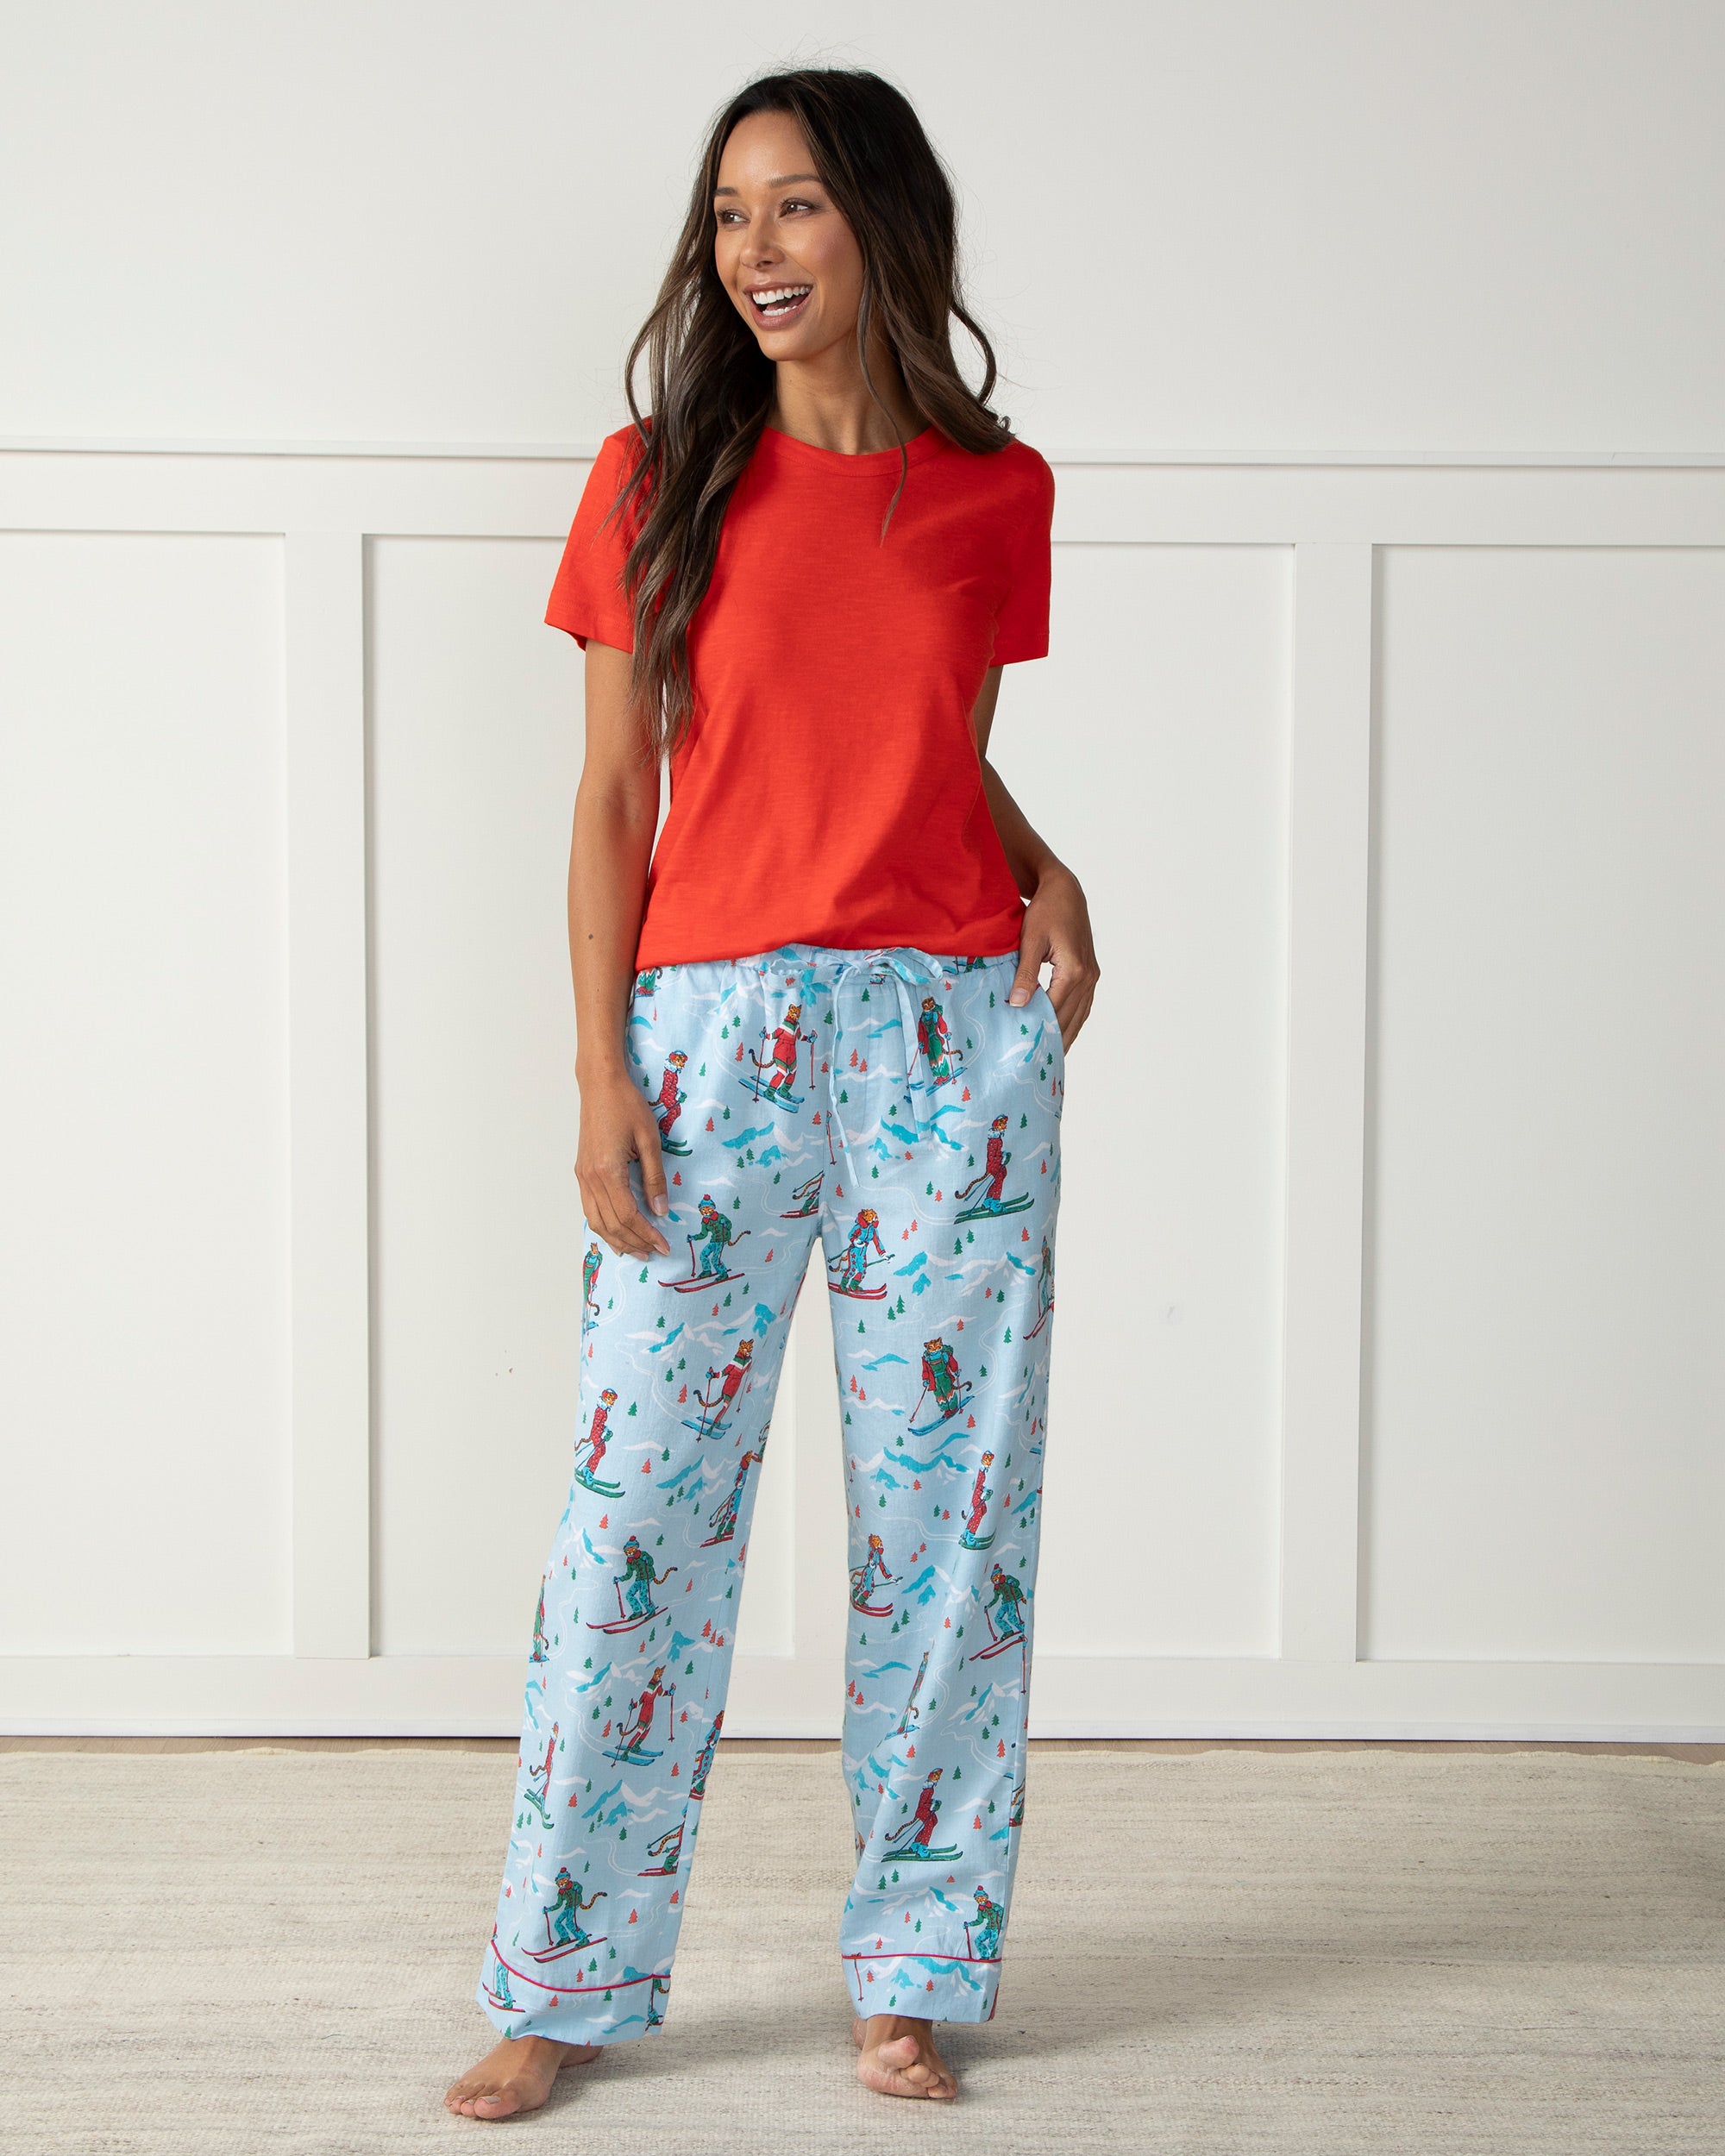 Hit the Slopes - Women's Tall Flannel Pajama Pants - Frosted Lake